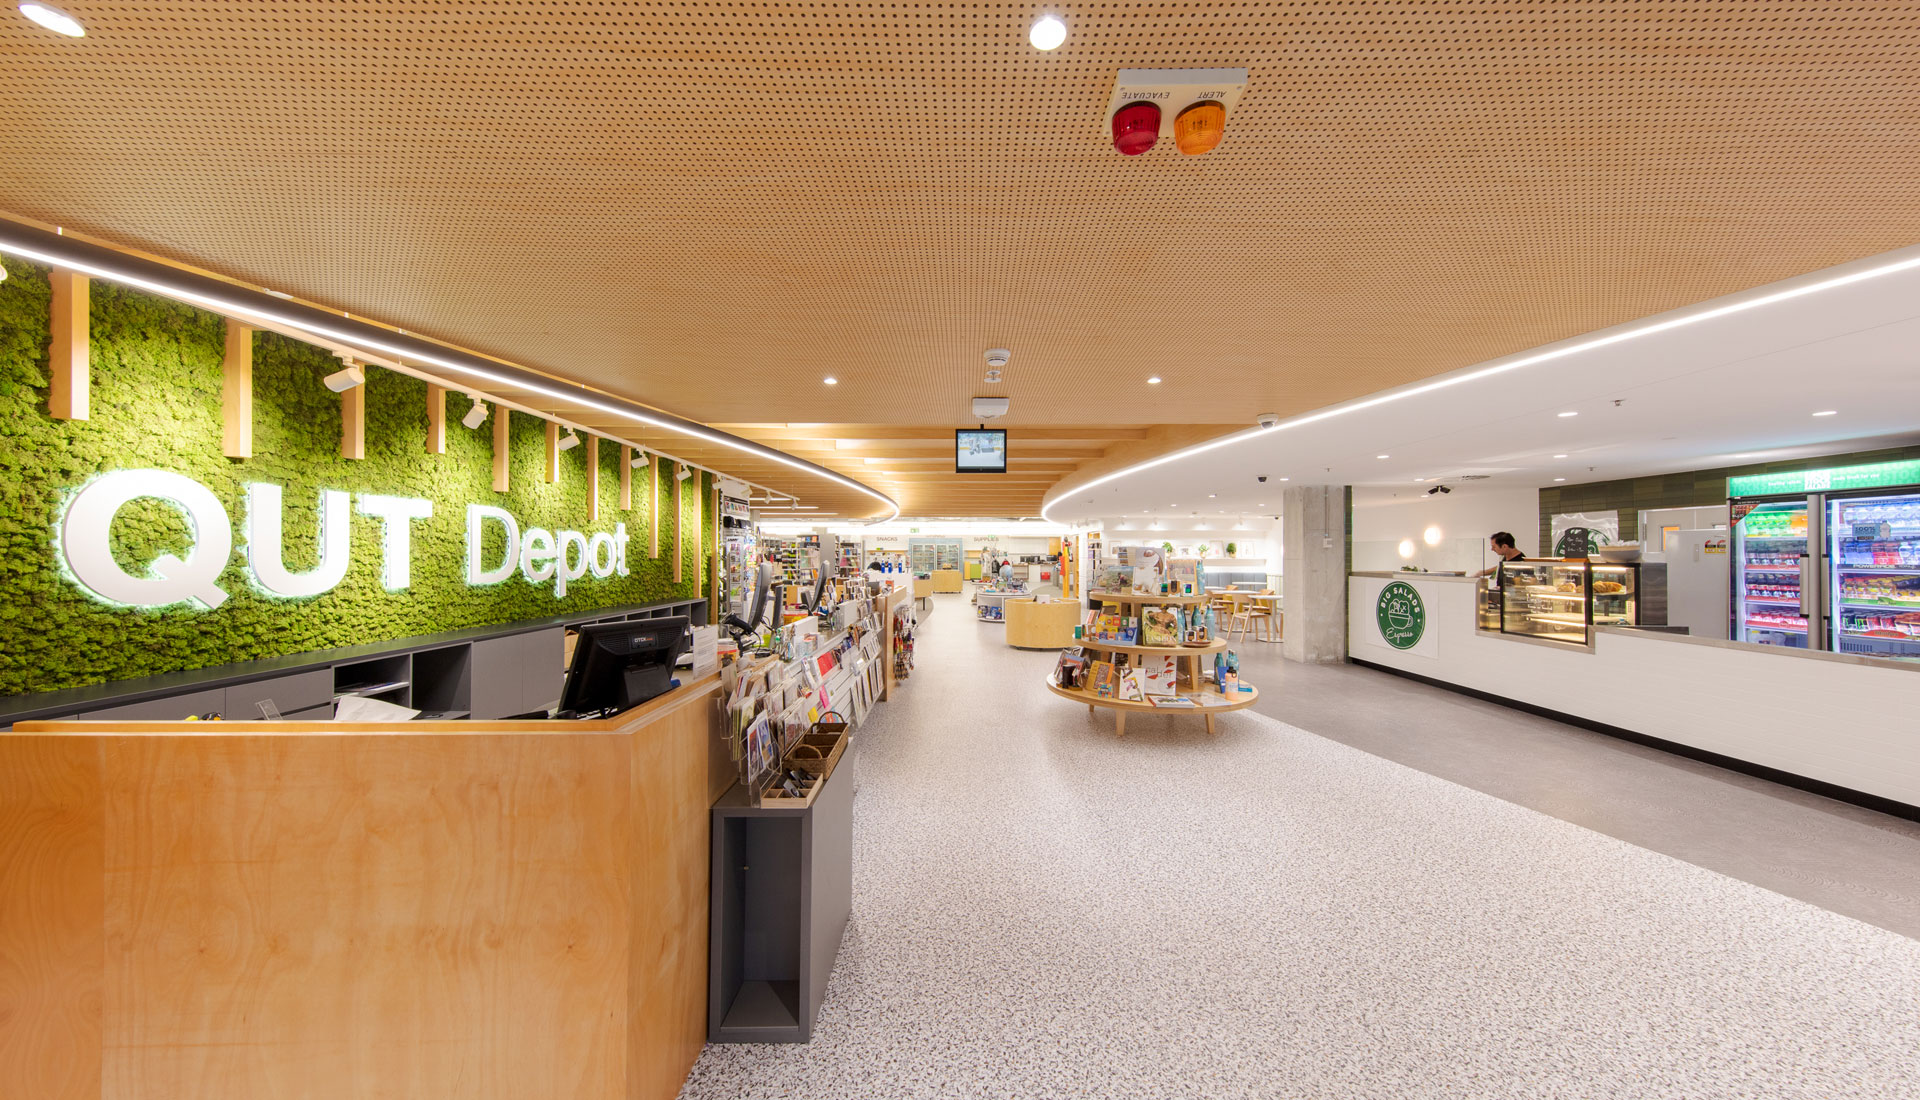 Mdf acoustic perforated ceiling panels - keystone linings